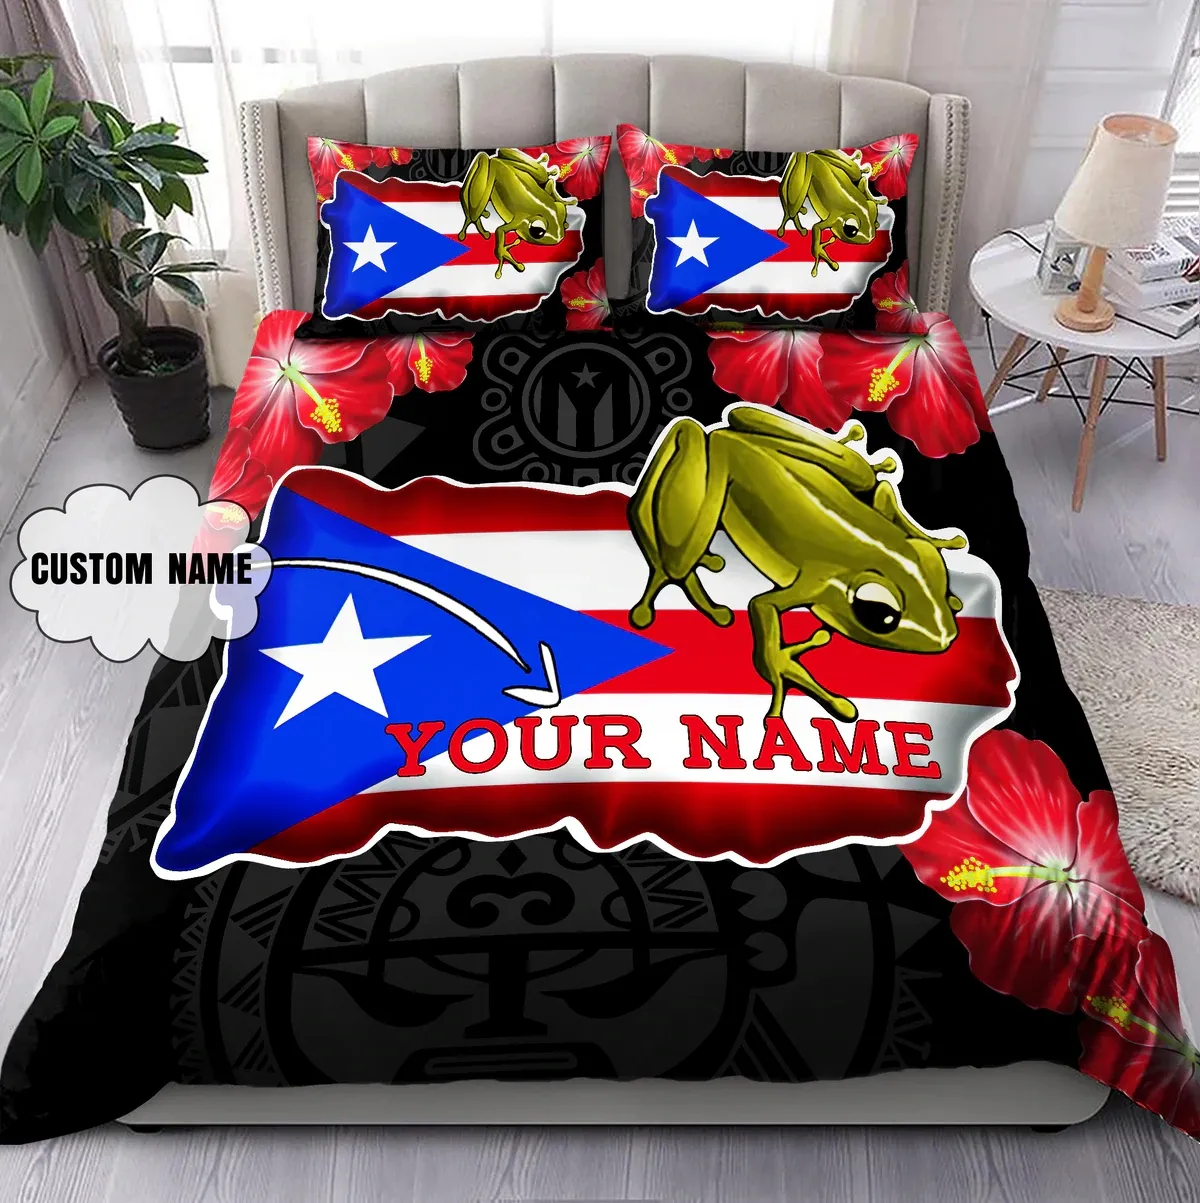 2022 Dropshipping Bedding Set With Comforter Puerto Rico Printed Duvet Cover Sets Custom Bed Covers Queen Size Bedding Set Duvet